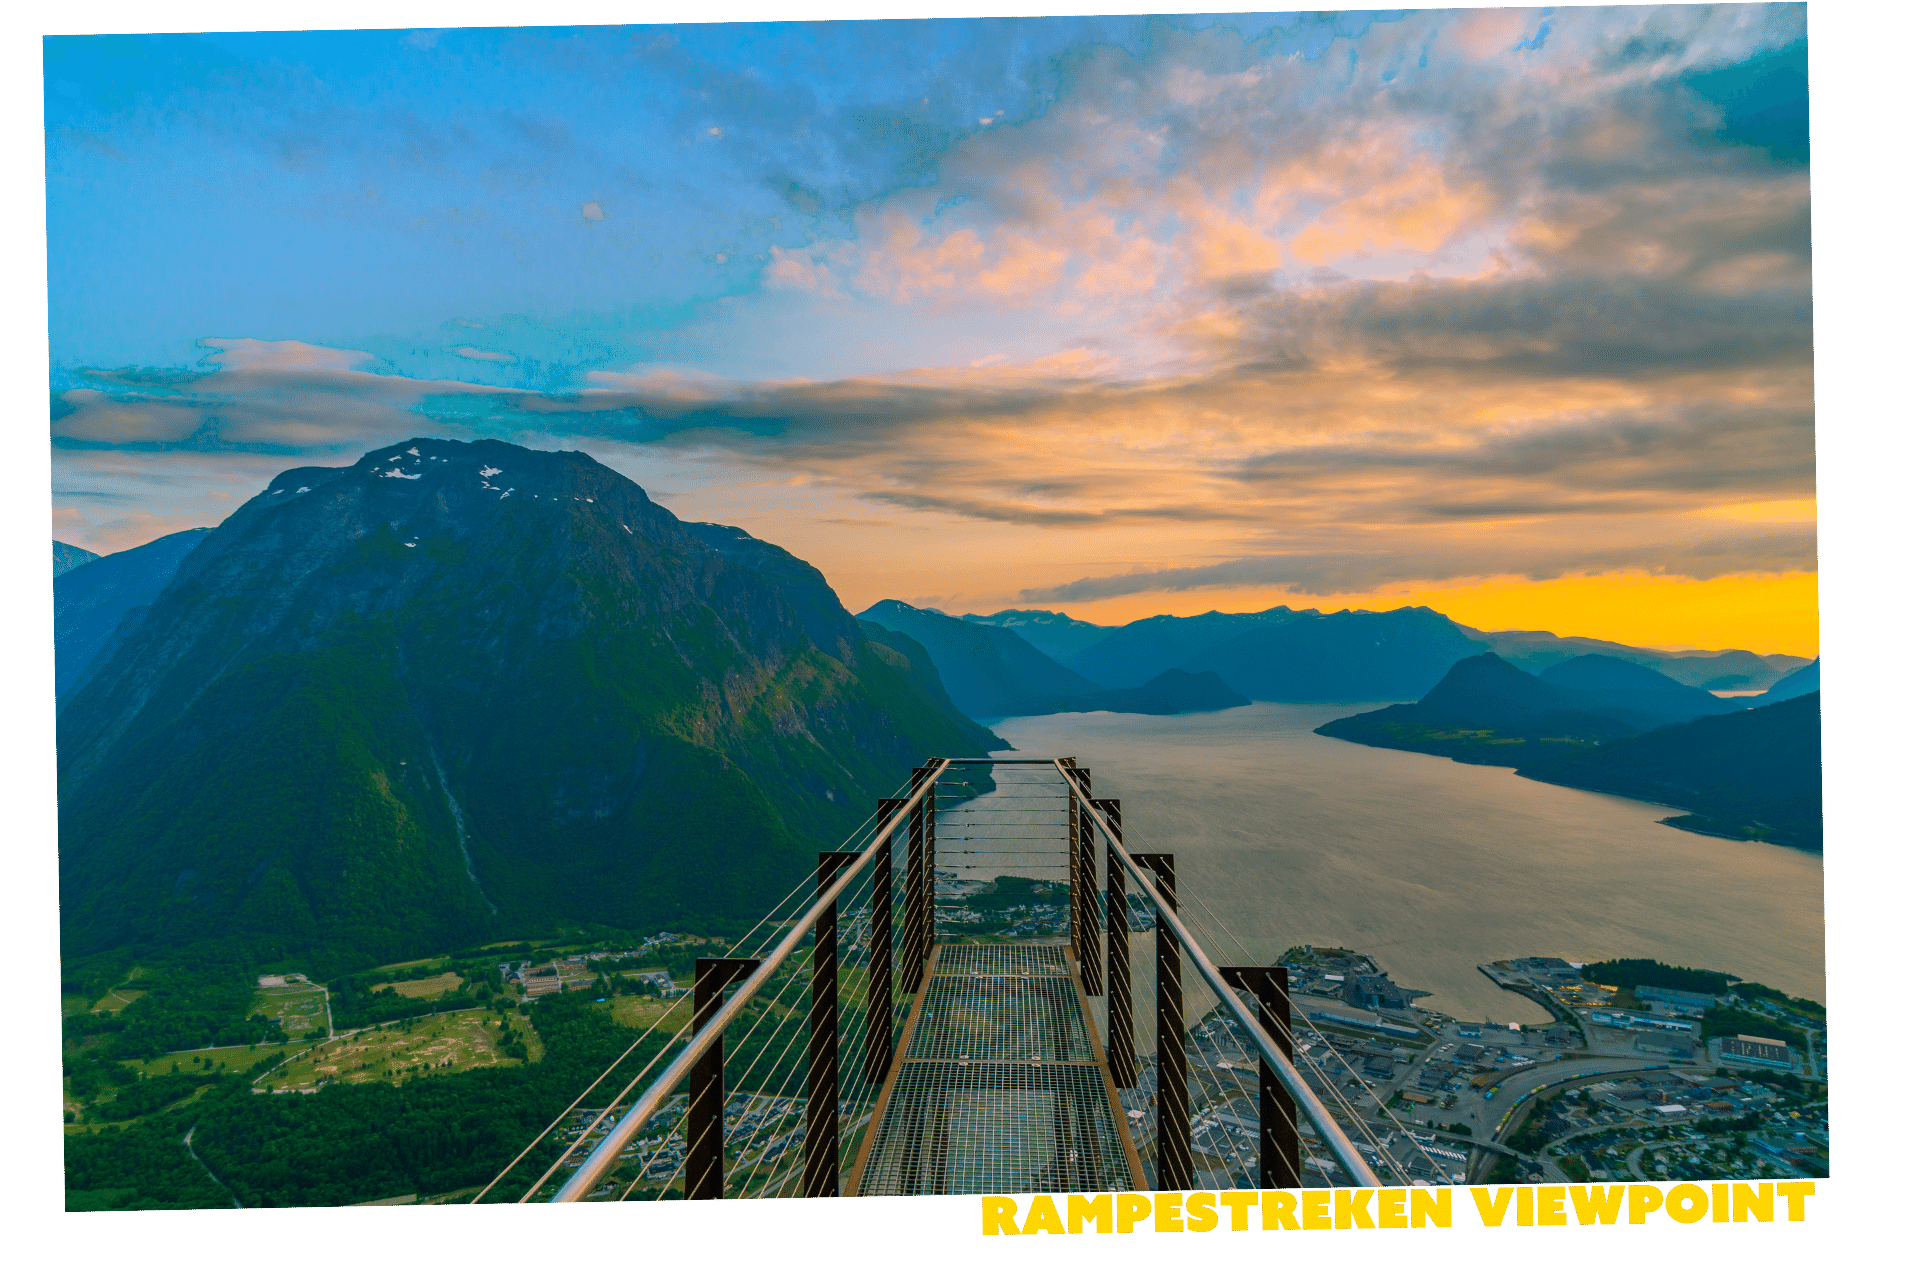 The view from the Rampestreken Viewpoint in Andalsnes - one of the Mission Impossible 7 filming locations